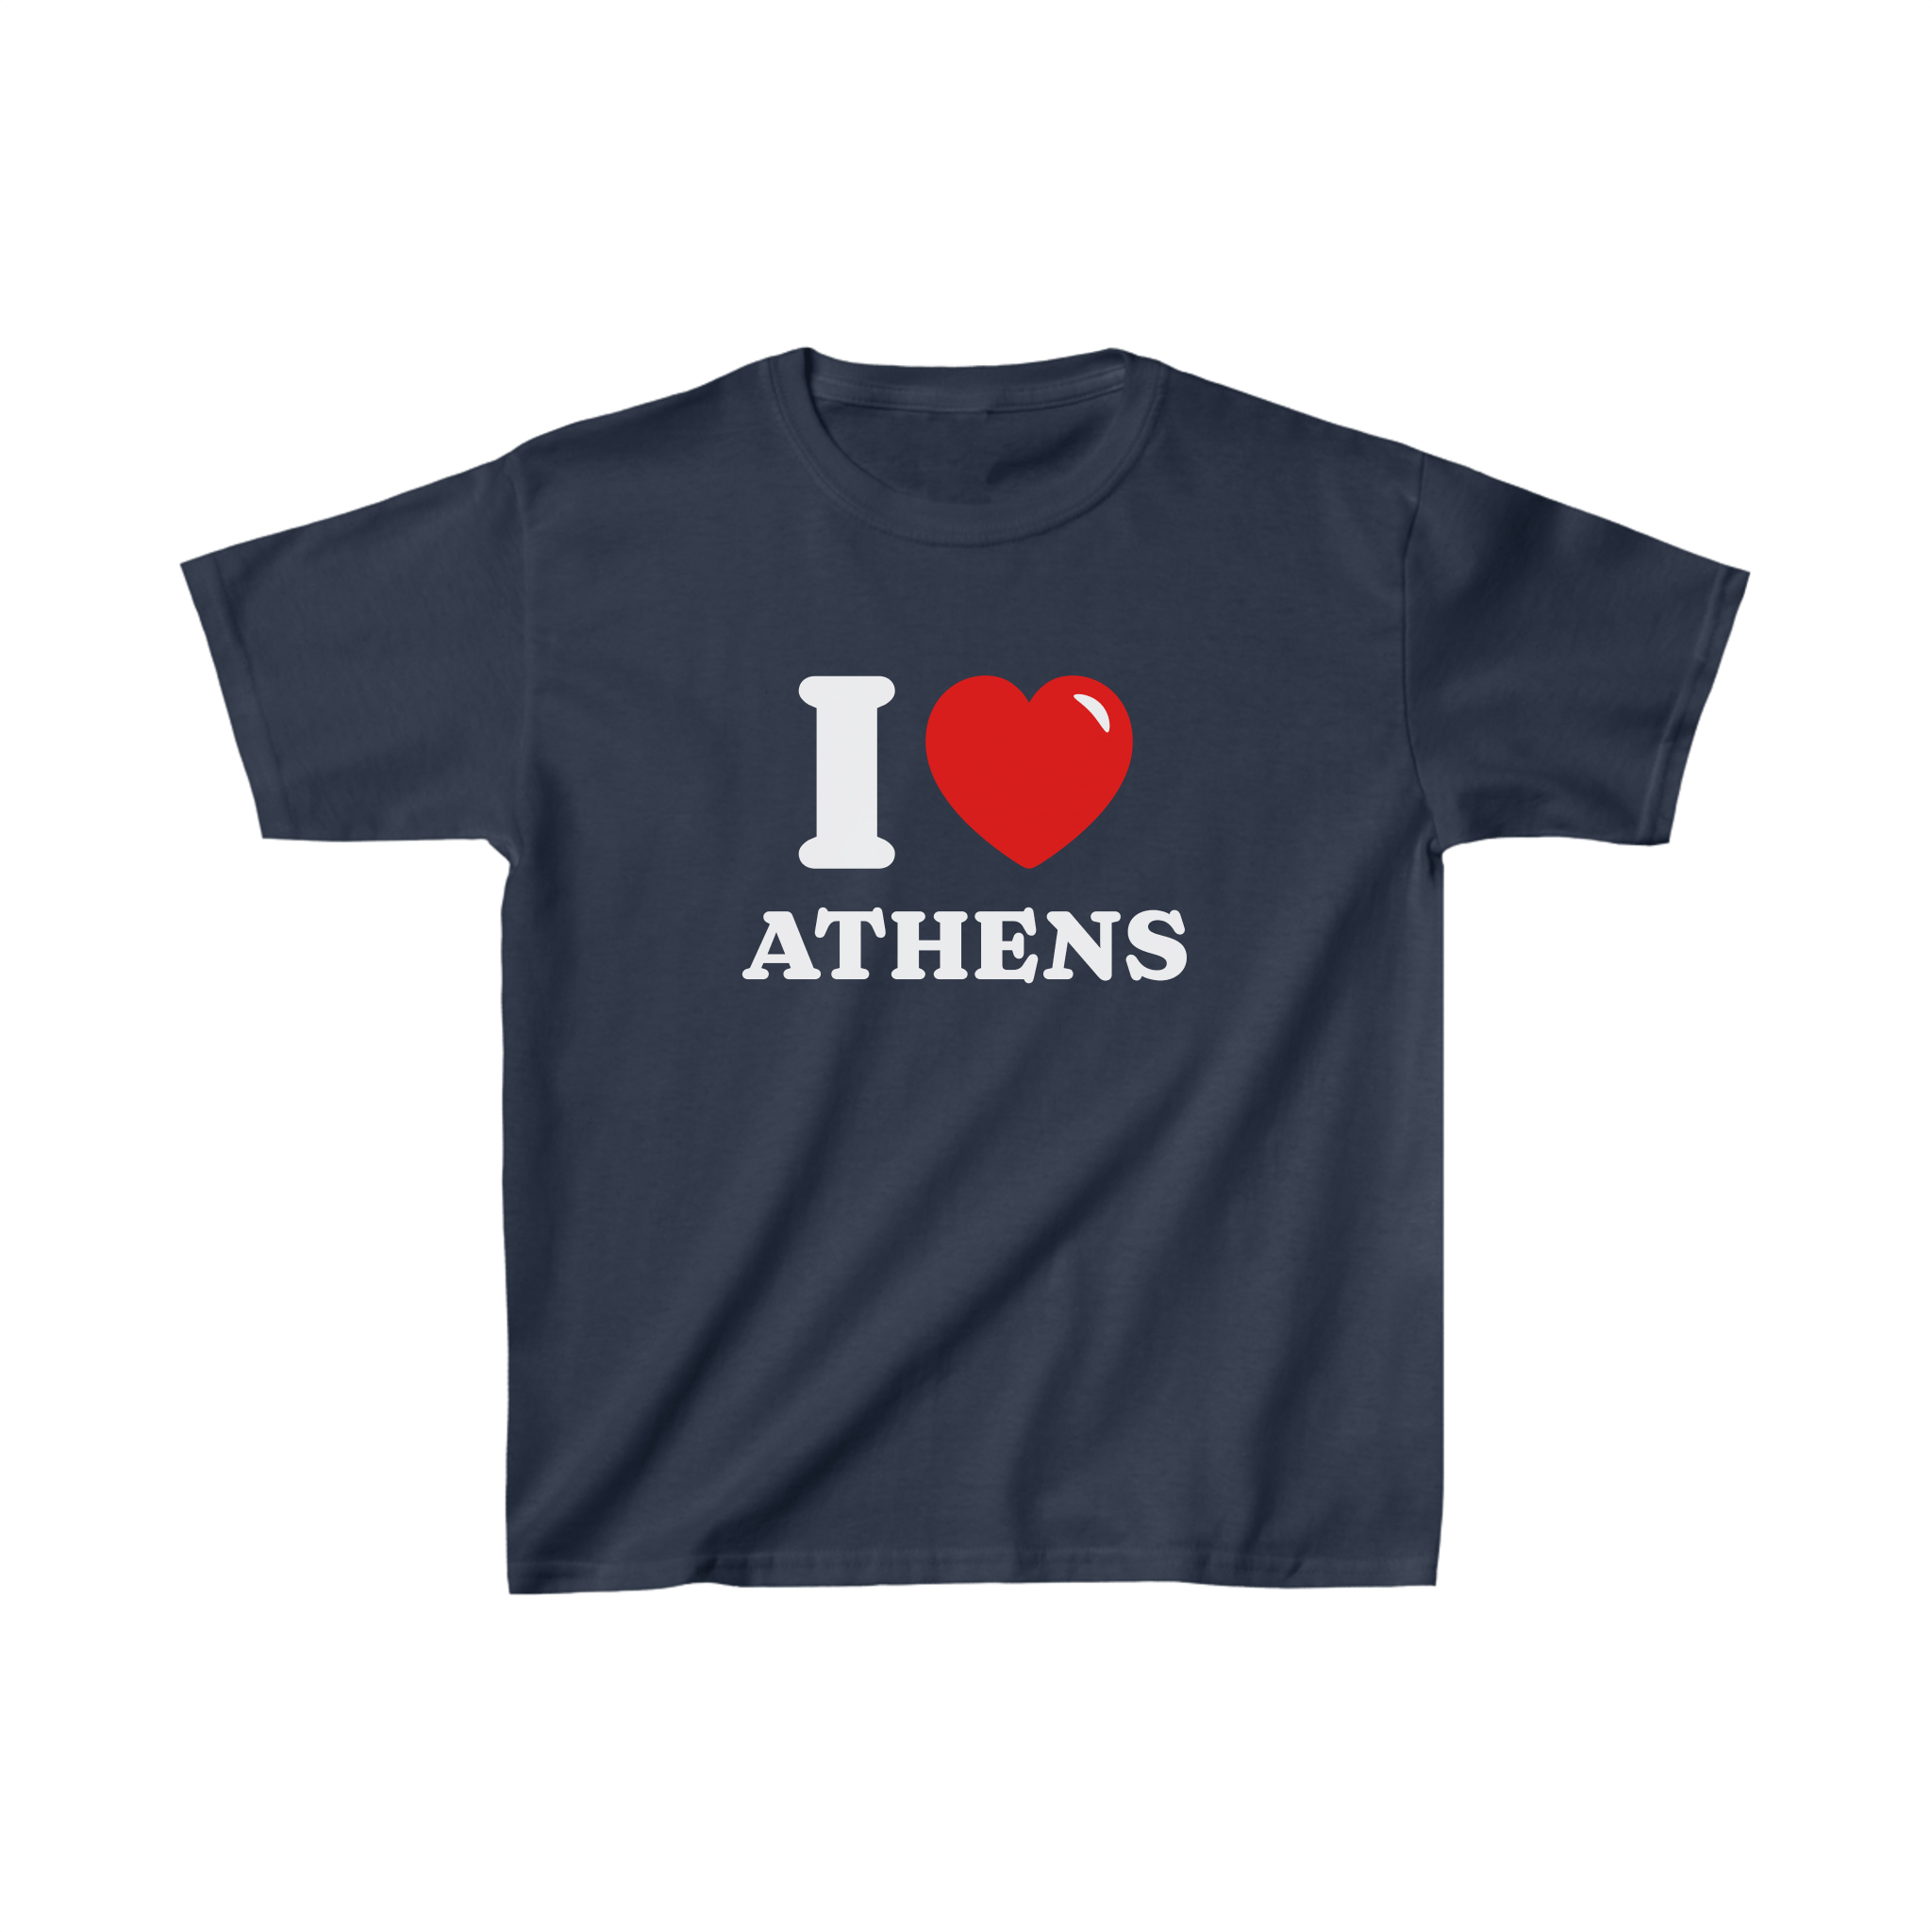 'I love Athens' baby tee - In Print We Trust